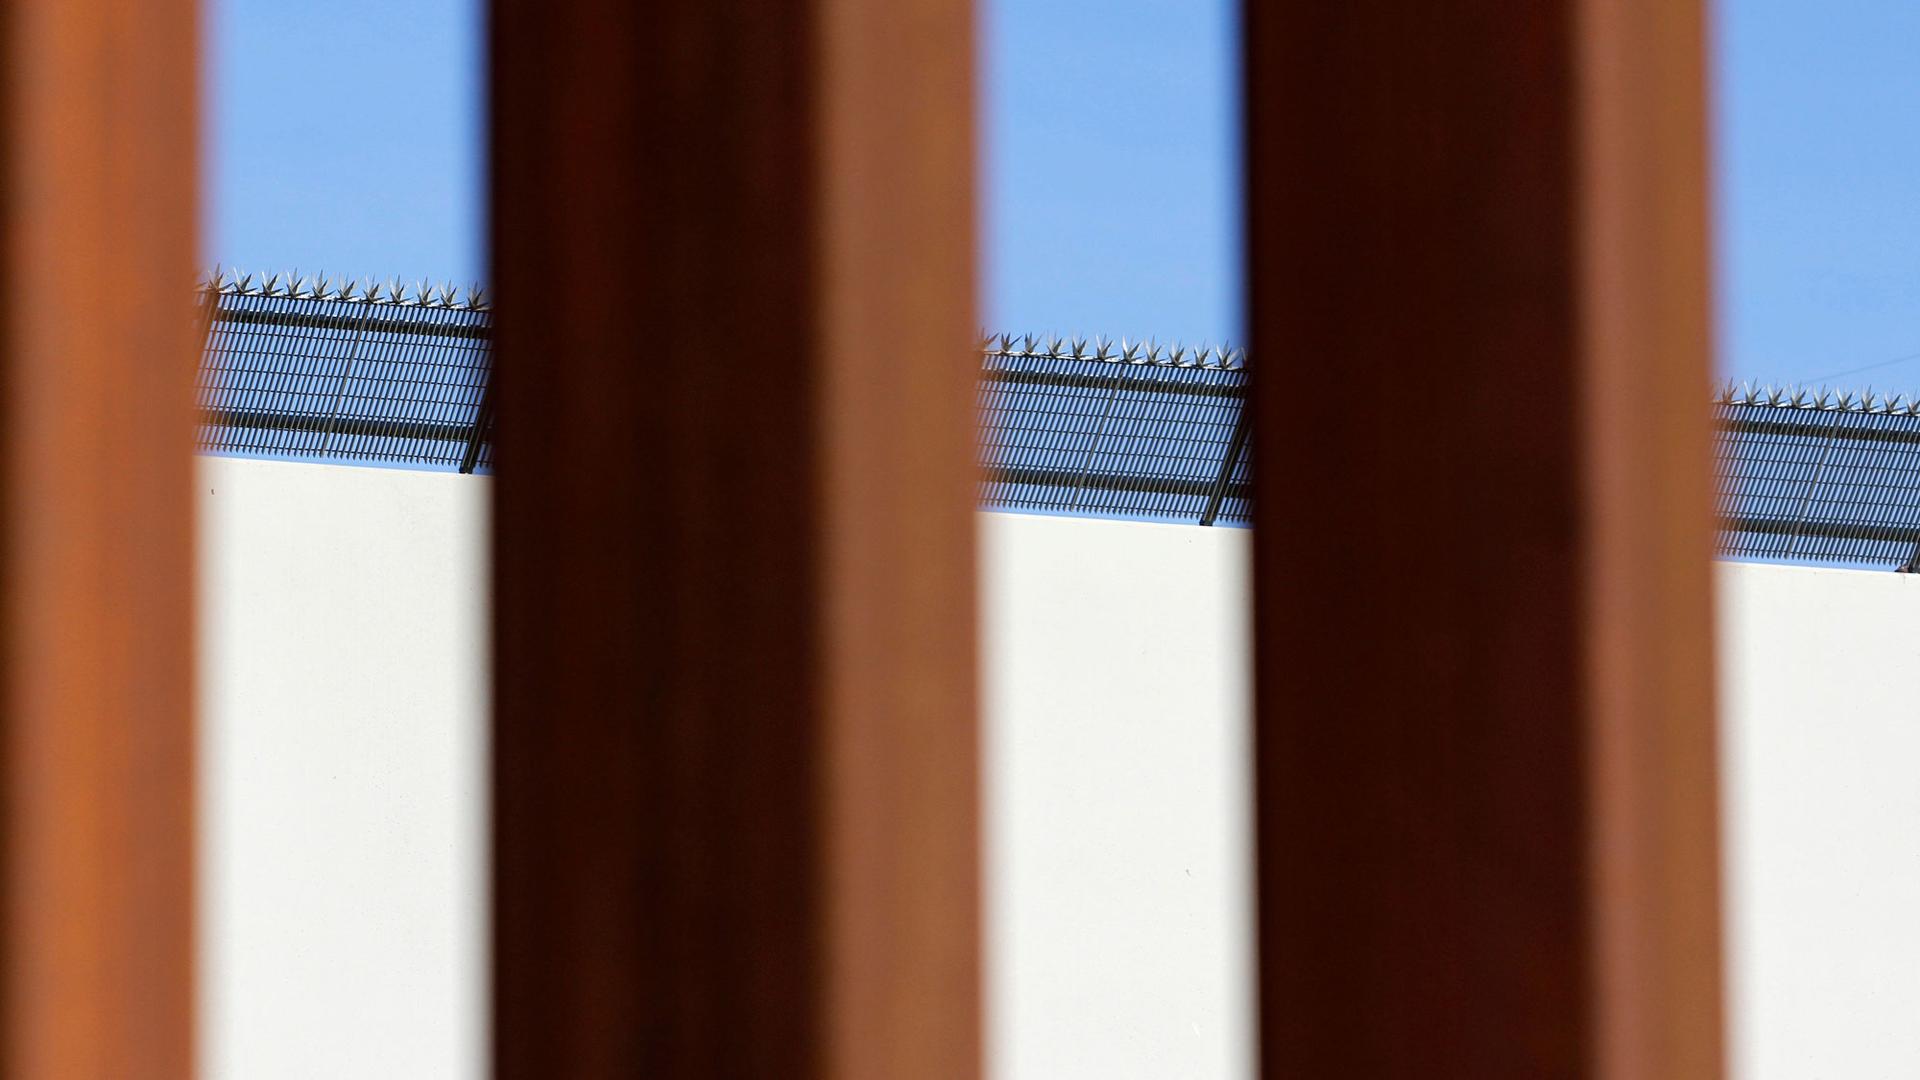 A prototype border wall with large metal spikes on top is seen through the metal slates of the border fence between Mexico and the United States.